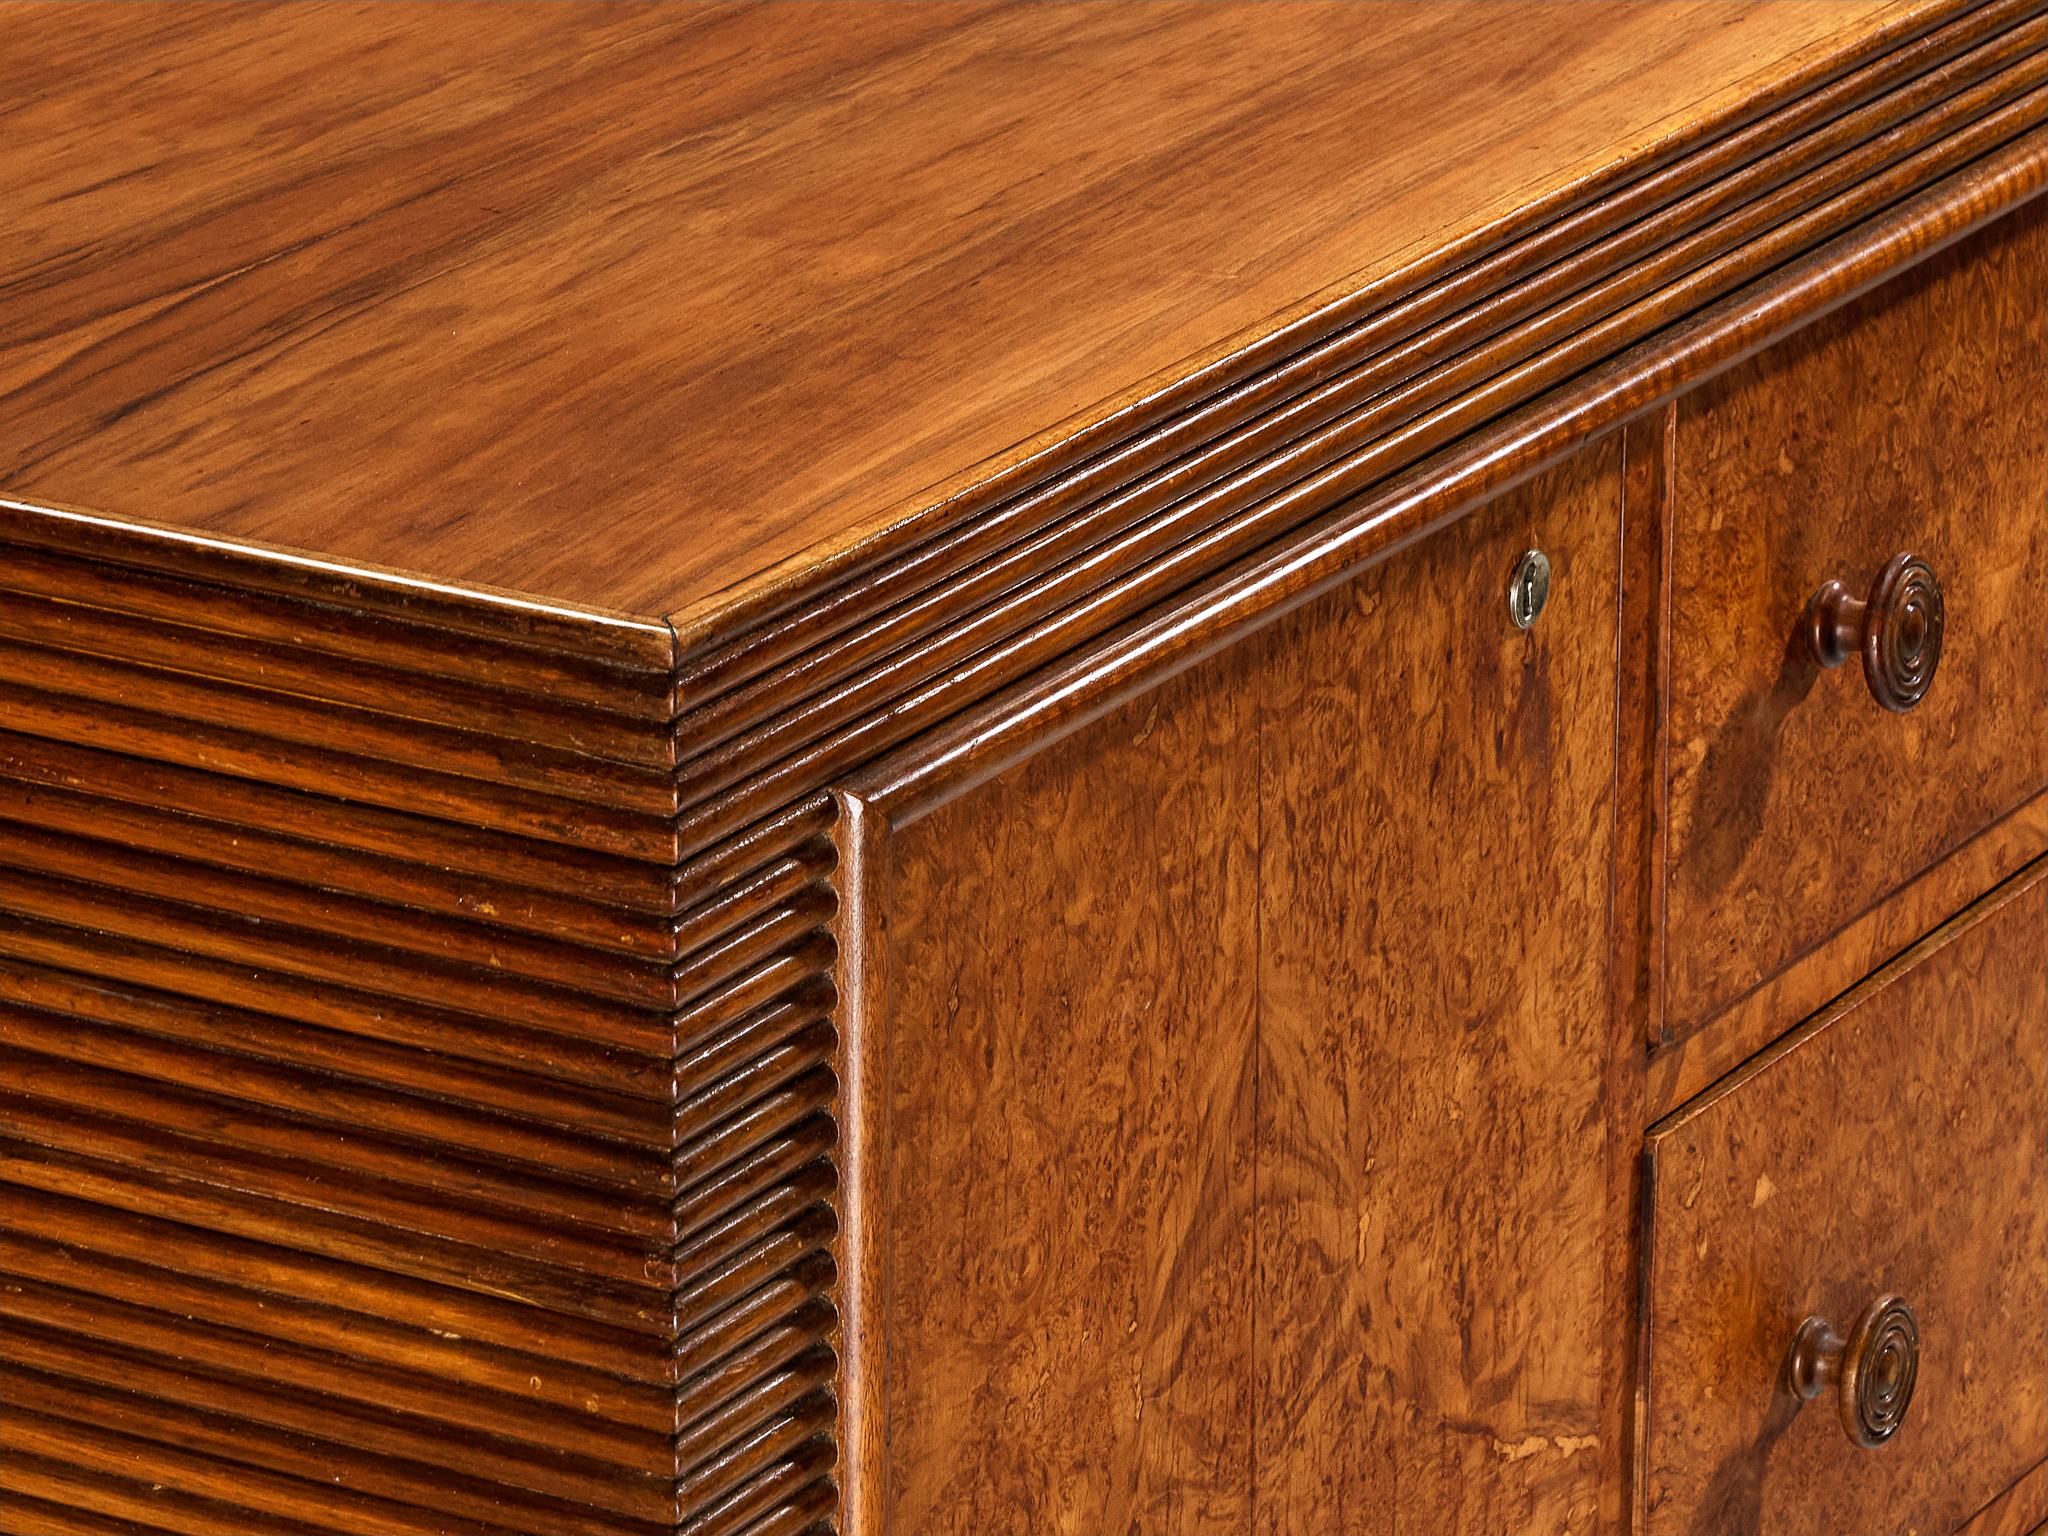 Italian Sideboard with Grissinato Carvings in Walnut